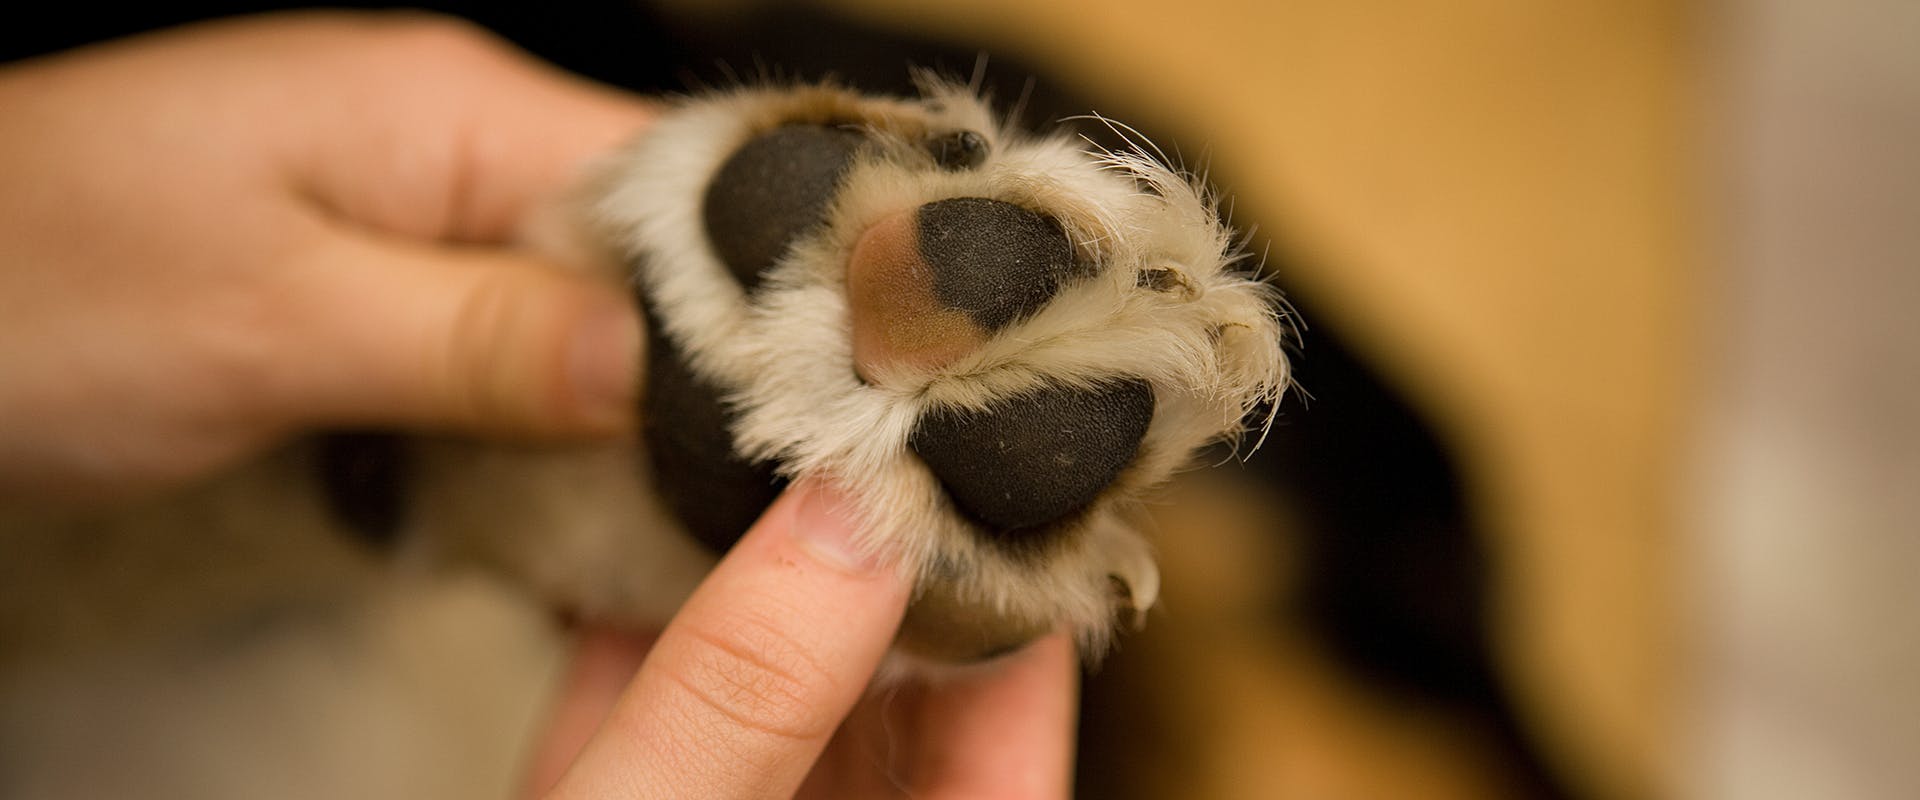 A person's hand inspecting a dog's paw